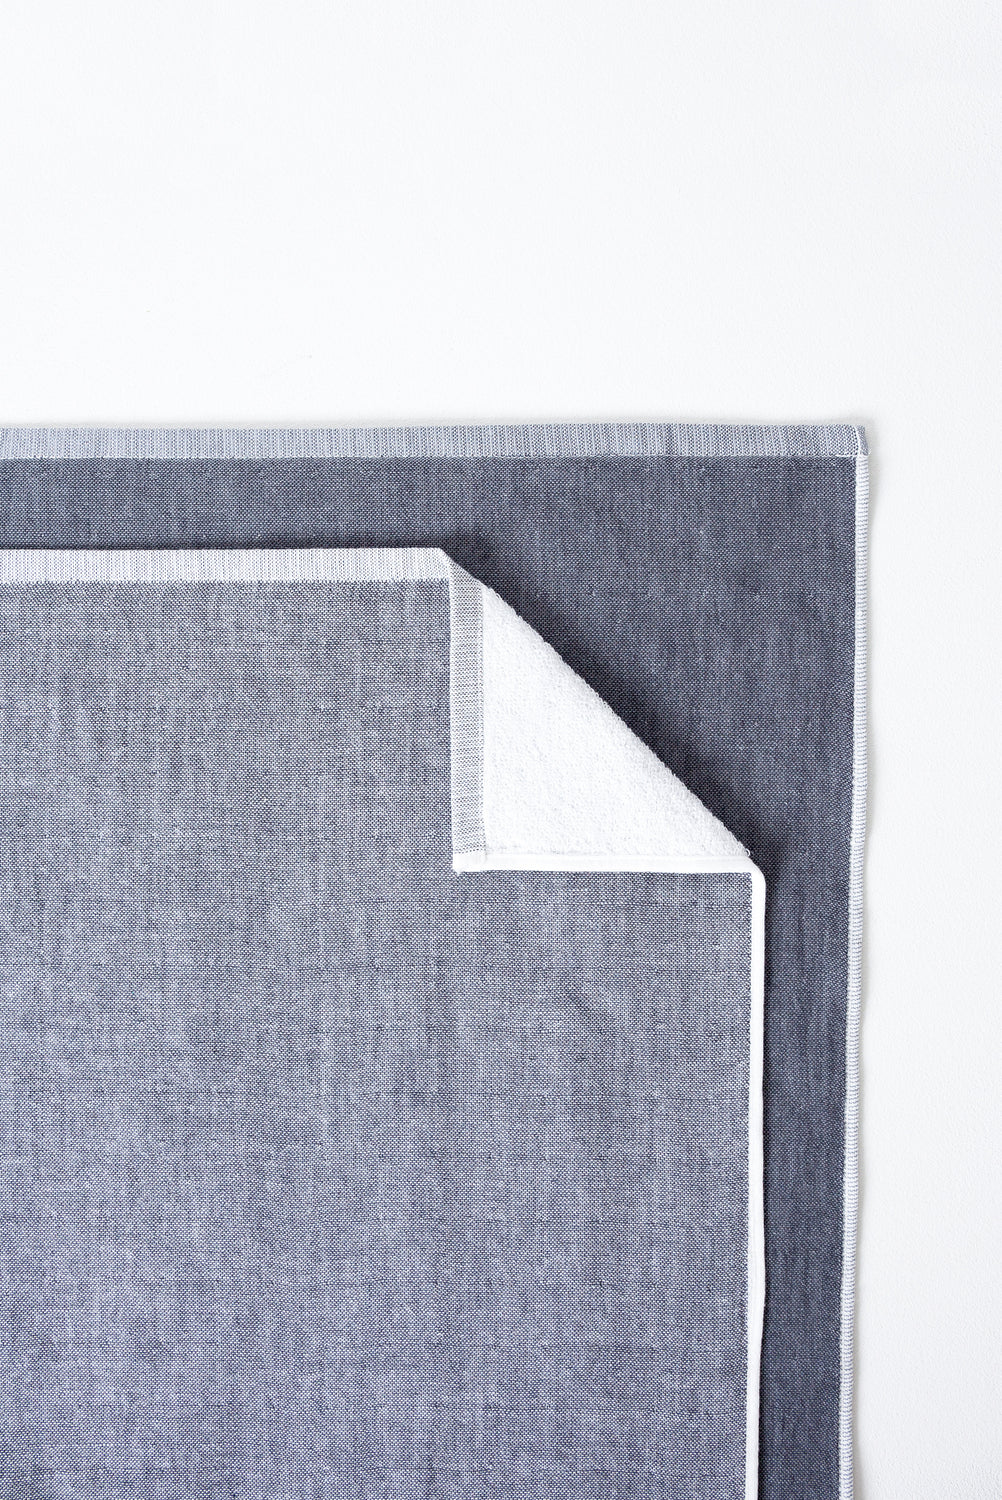 Two Tone Chambray Towel